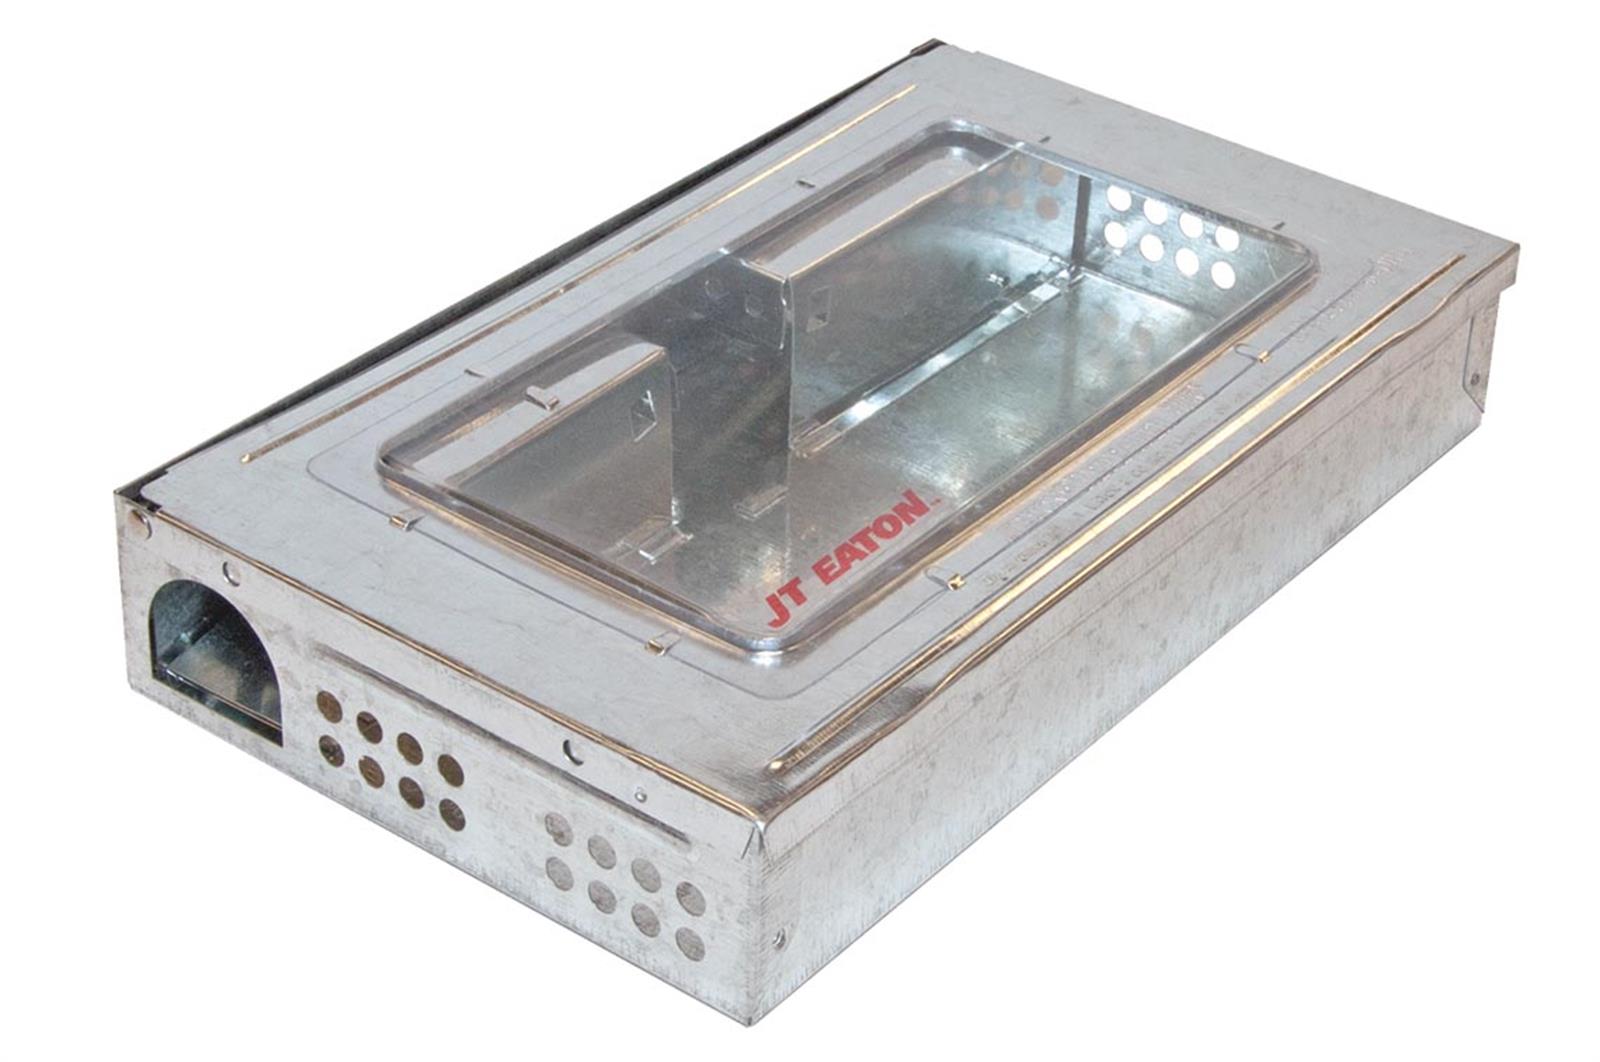 https://www.nixalite.com/SiteContent/NixaliteFiles/Families/117/JT420%20REPEATER%20MOUSE%20TRAP%20W%20CLEAR%20TOP.jpg